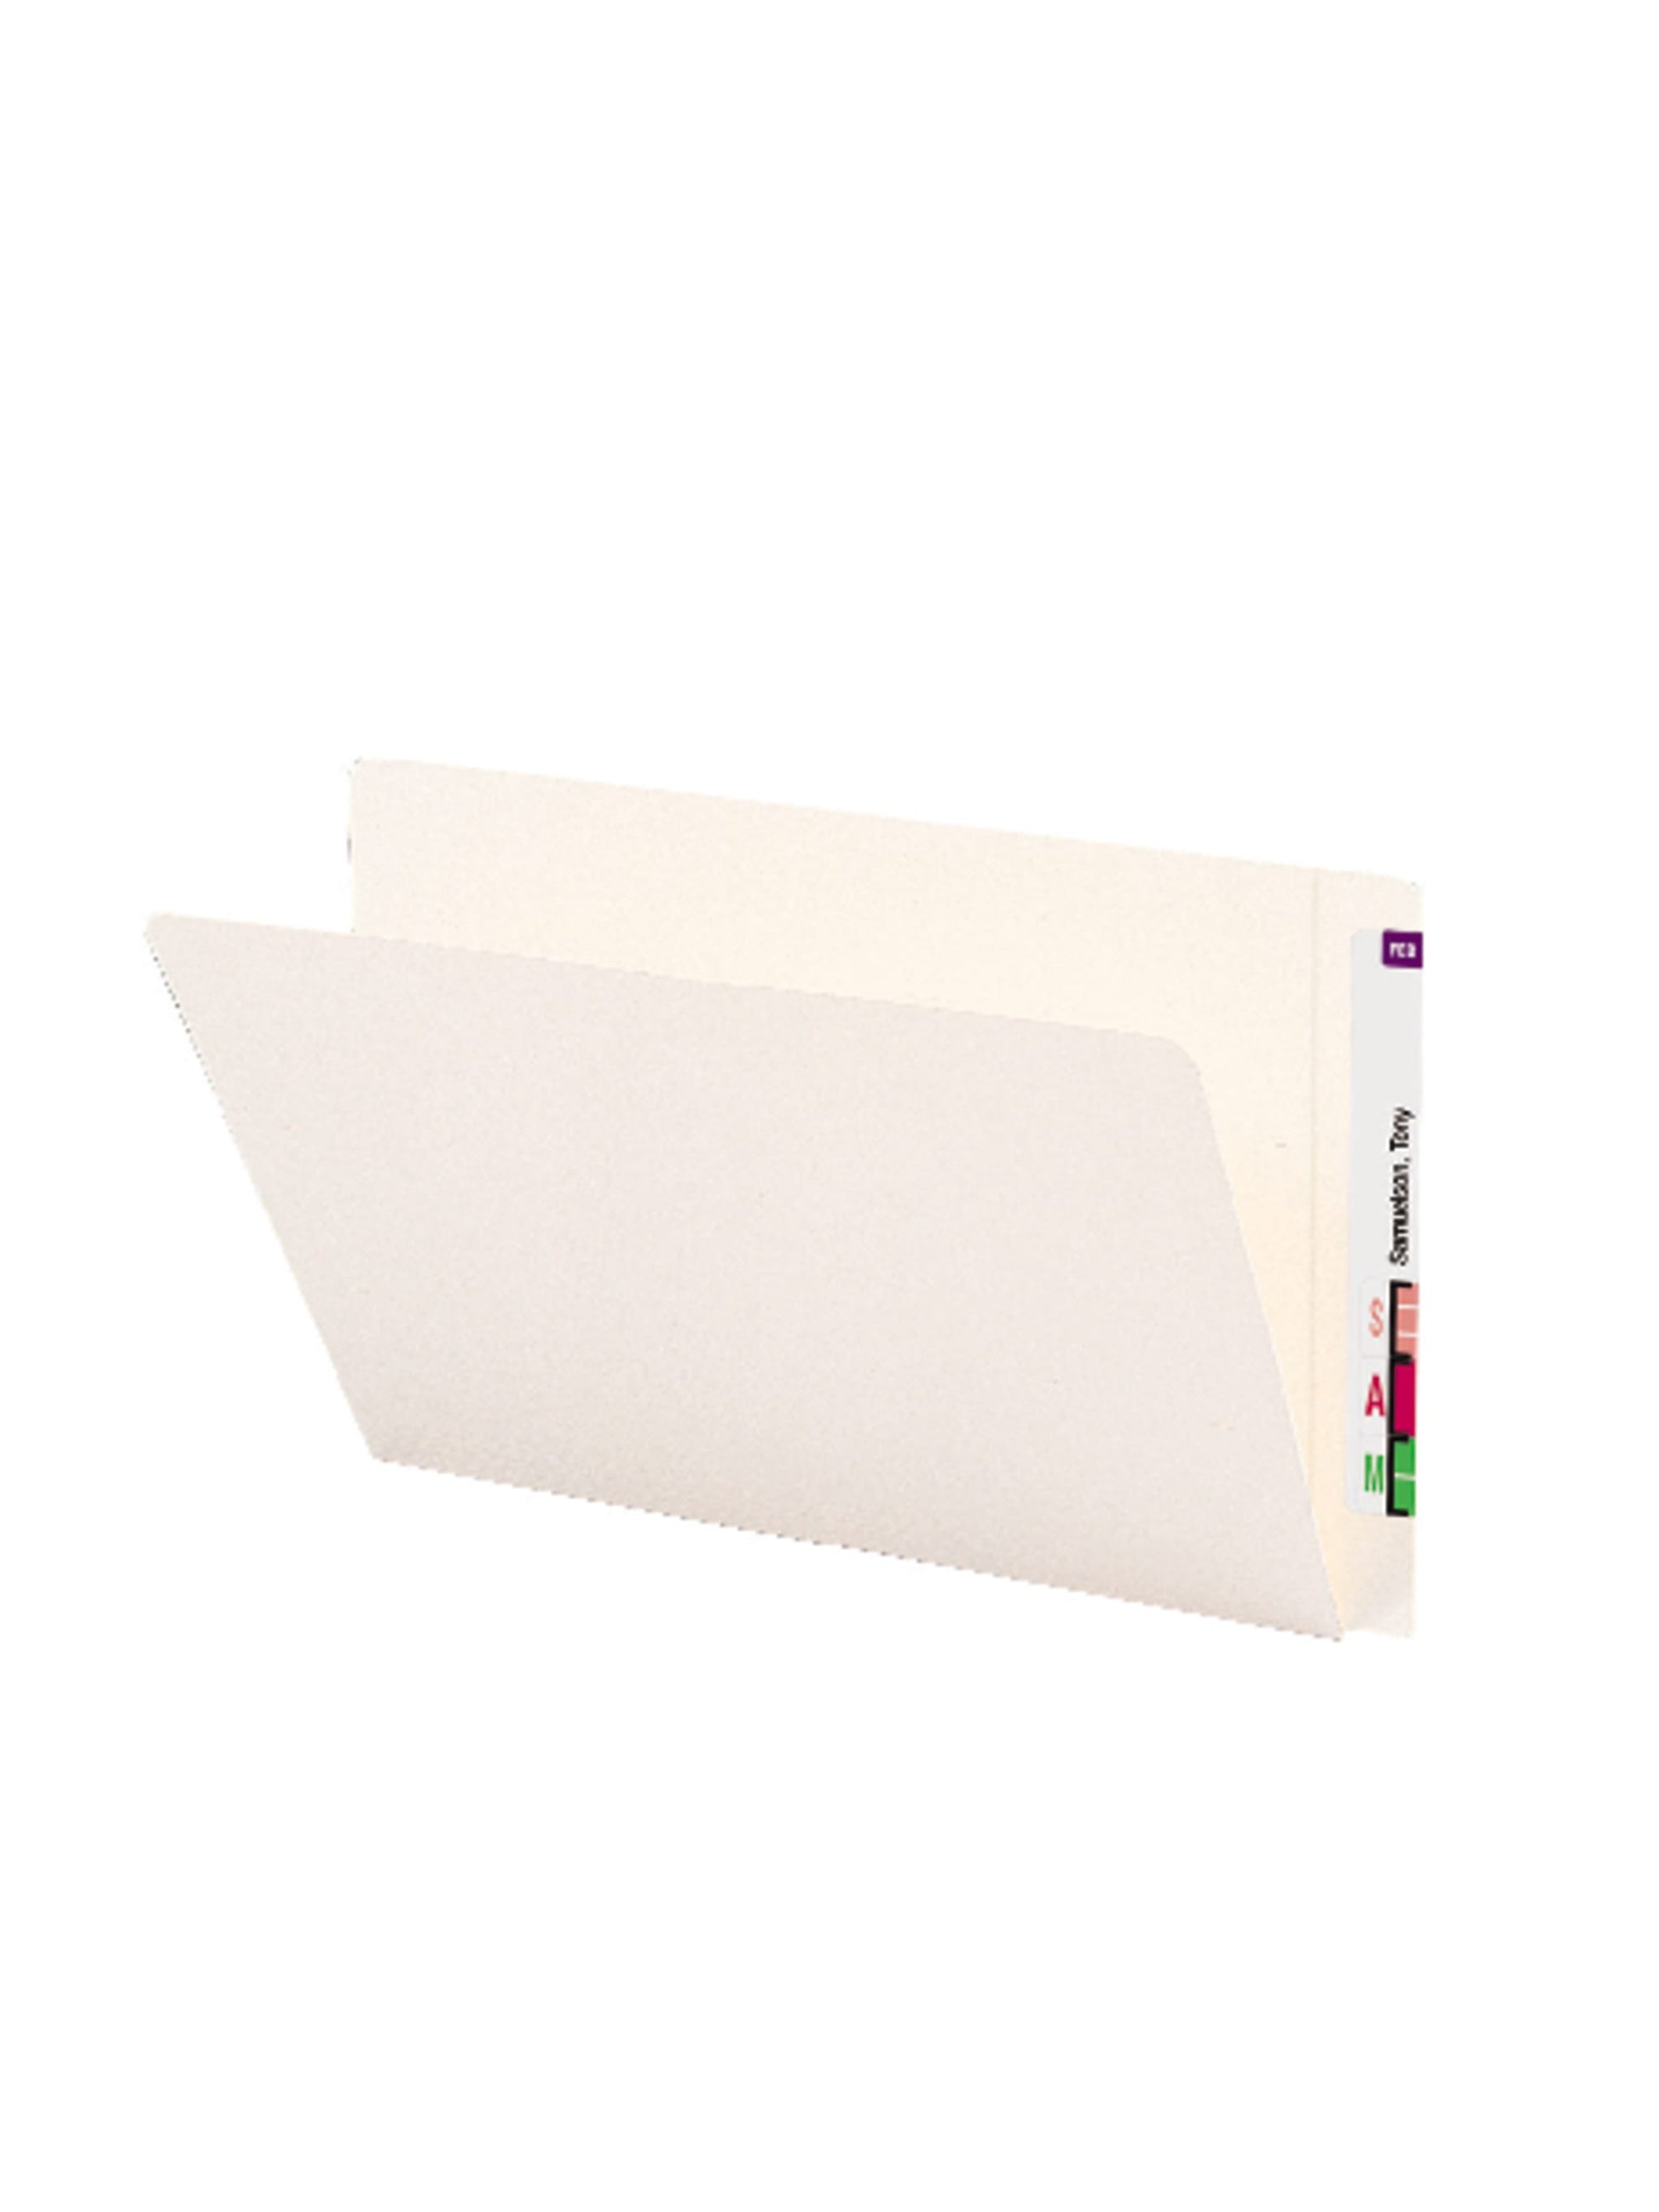 Reinforced End Tab File Folders, Straight-Cut Tab, Ivory Color, Legal Size, Set of 100, 086486245593